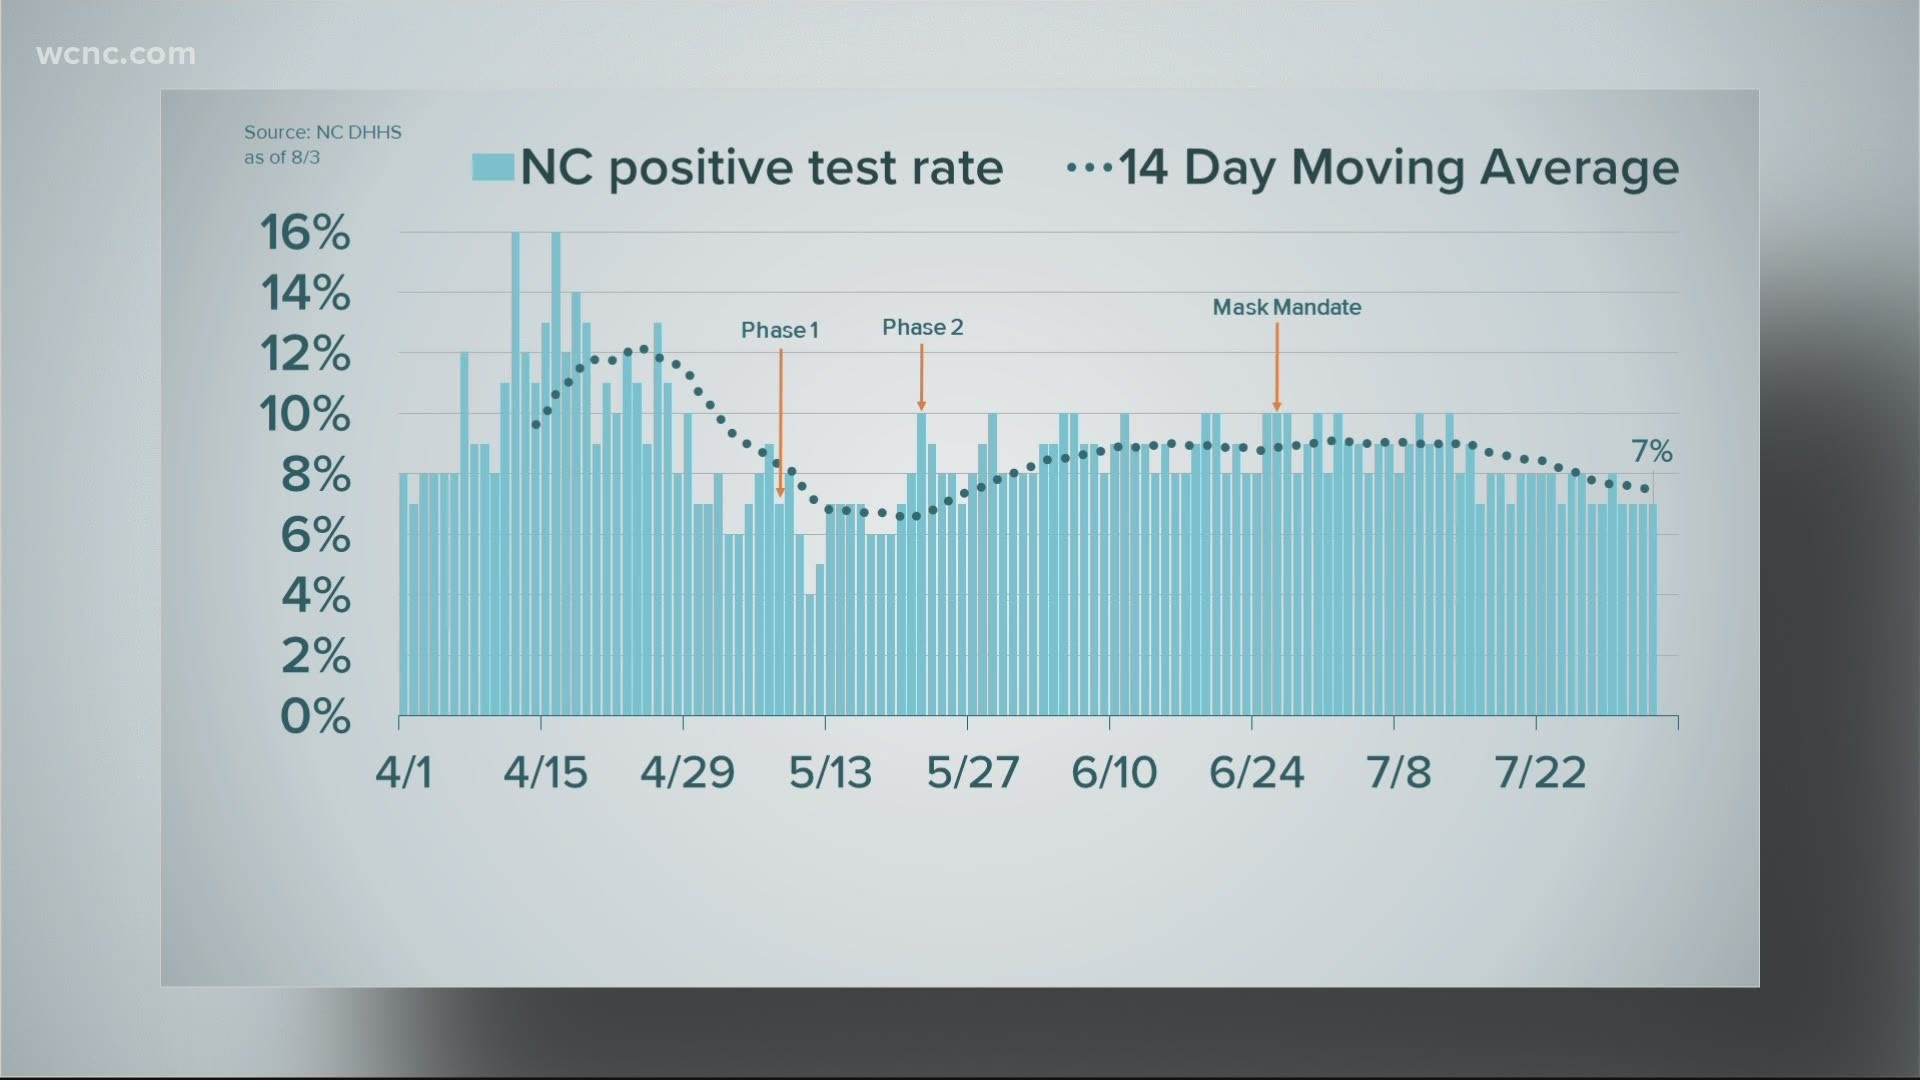 Despite some recent improvements in the numbers, North Carolina marked a sad milestone Tuesday. The state has now lost more than 2,000 lives to COVID-19.